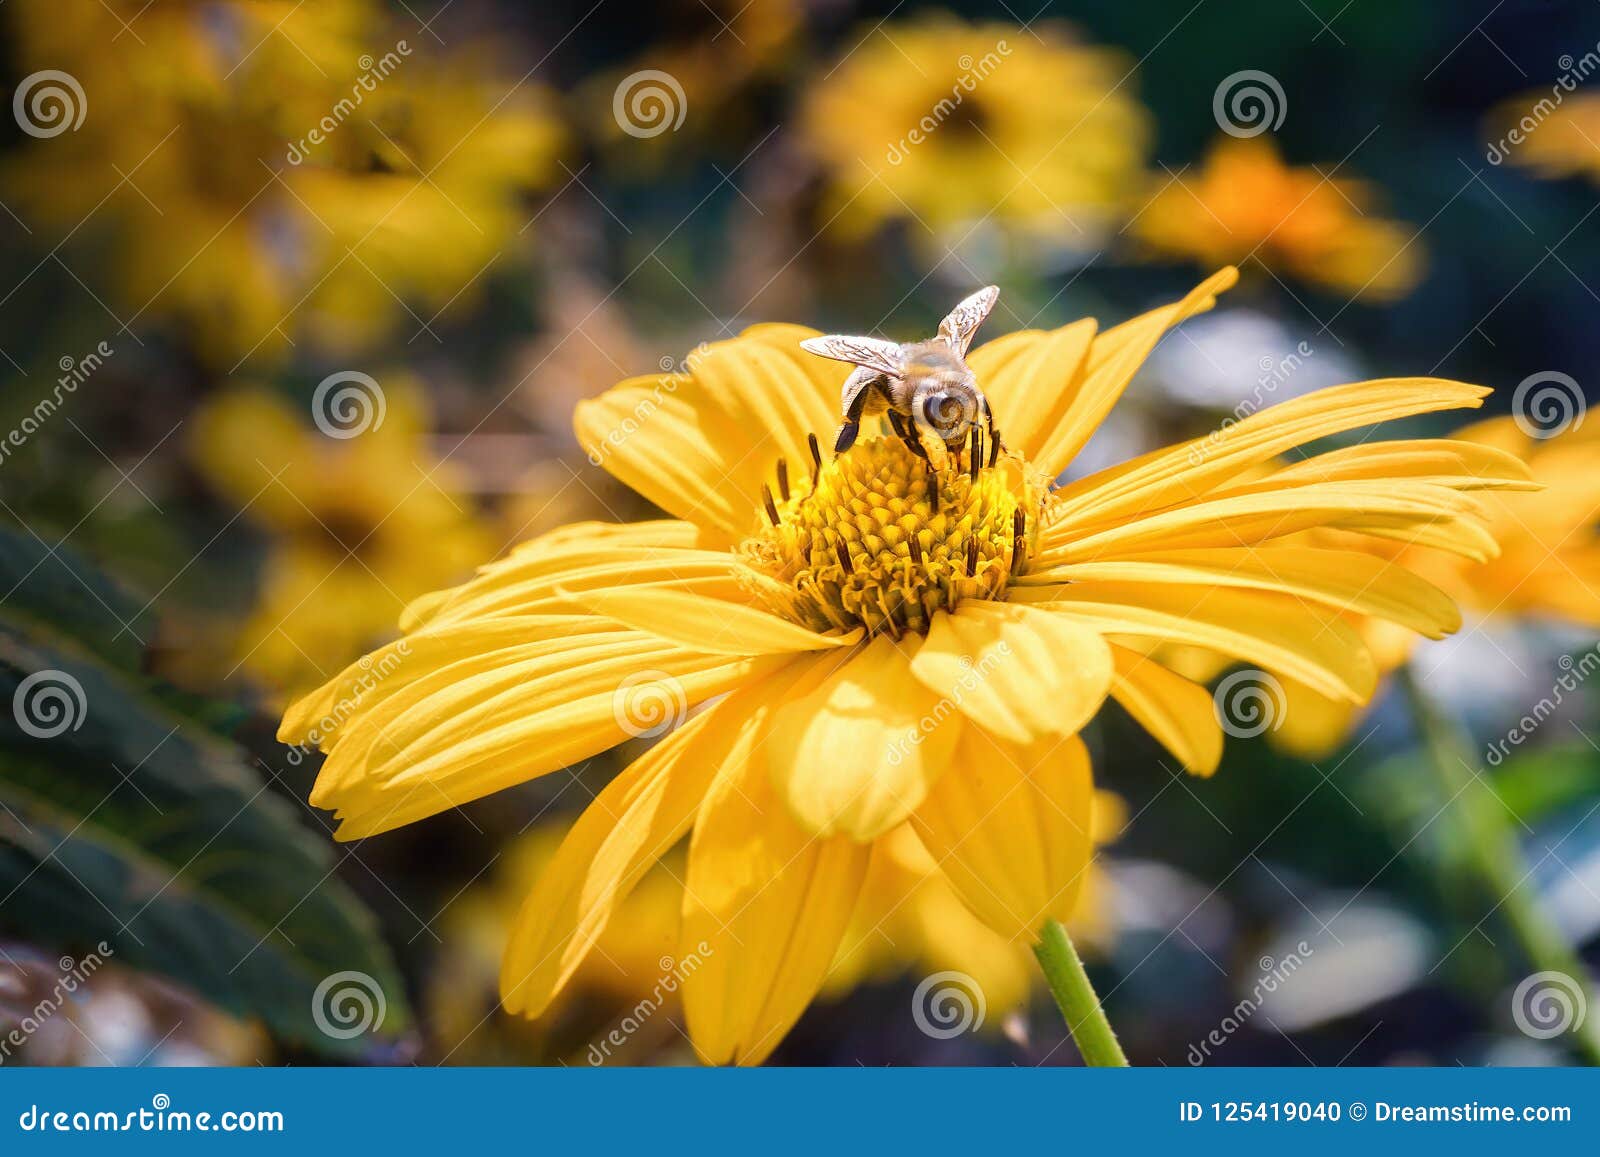 bee on an arnica blossom